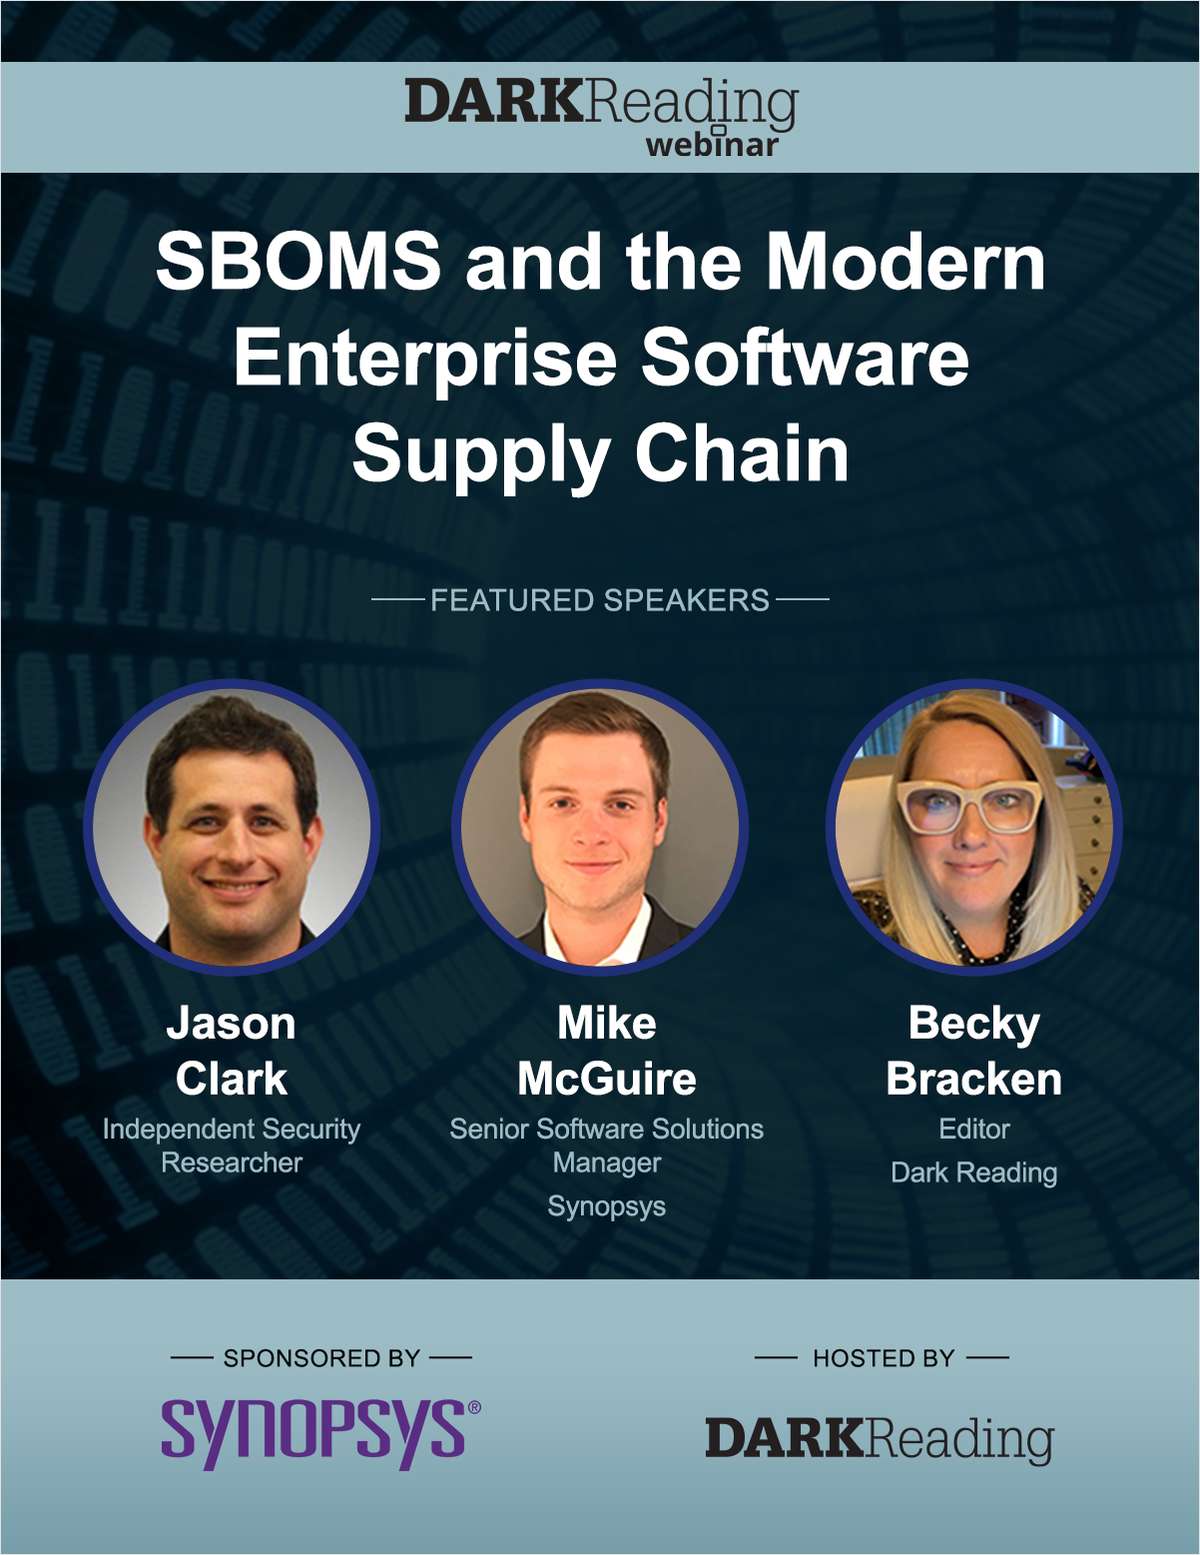 SBOMS and the Modern Enterprise Software Supply Chain